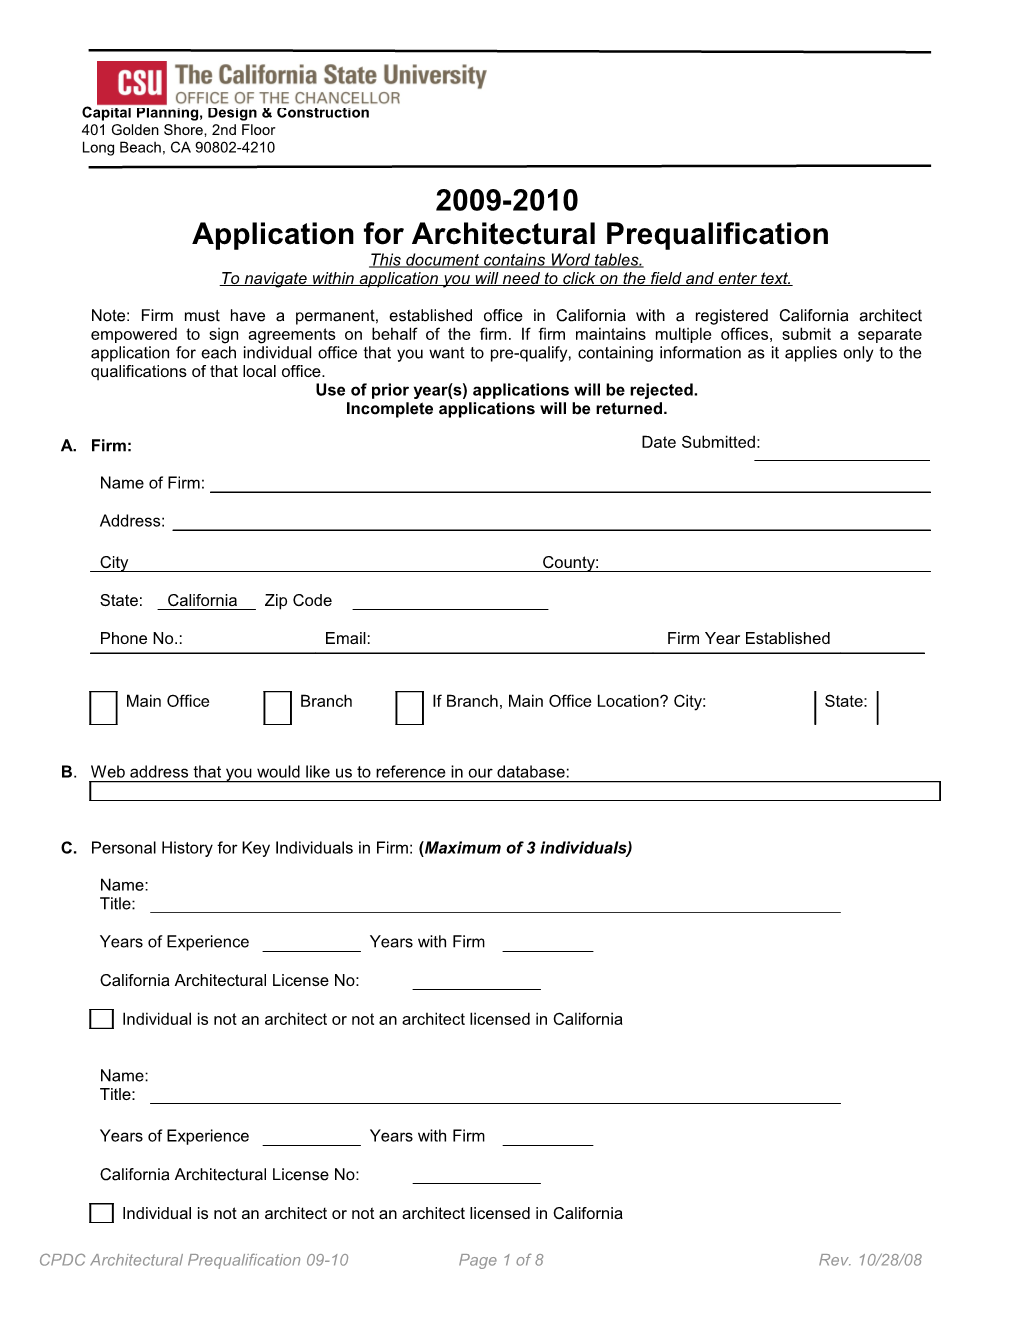 Application for Architectural Prequalification